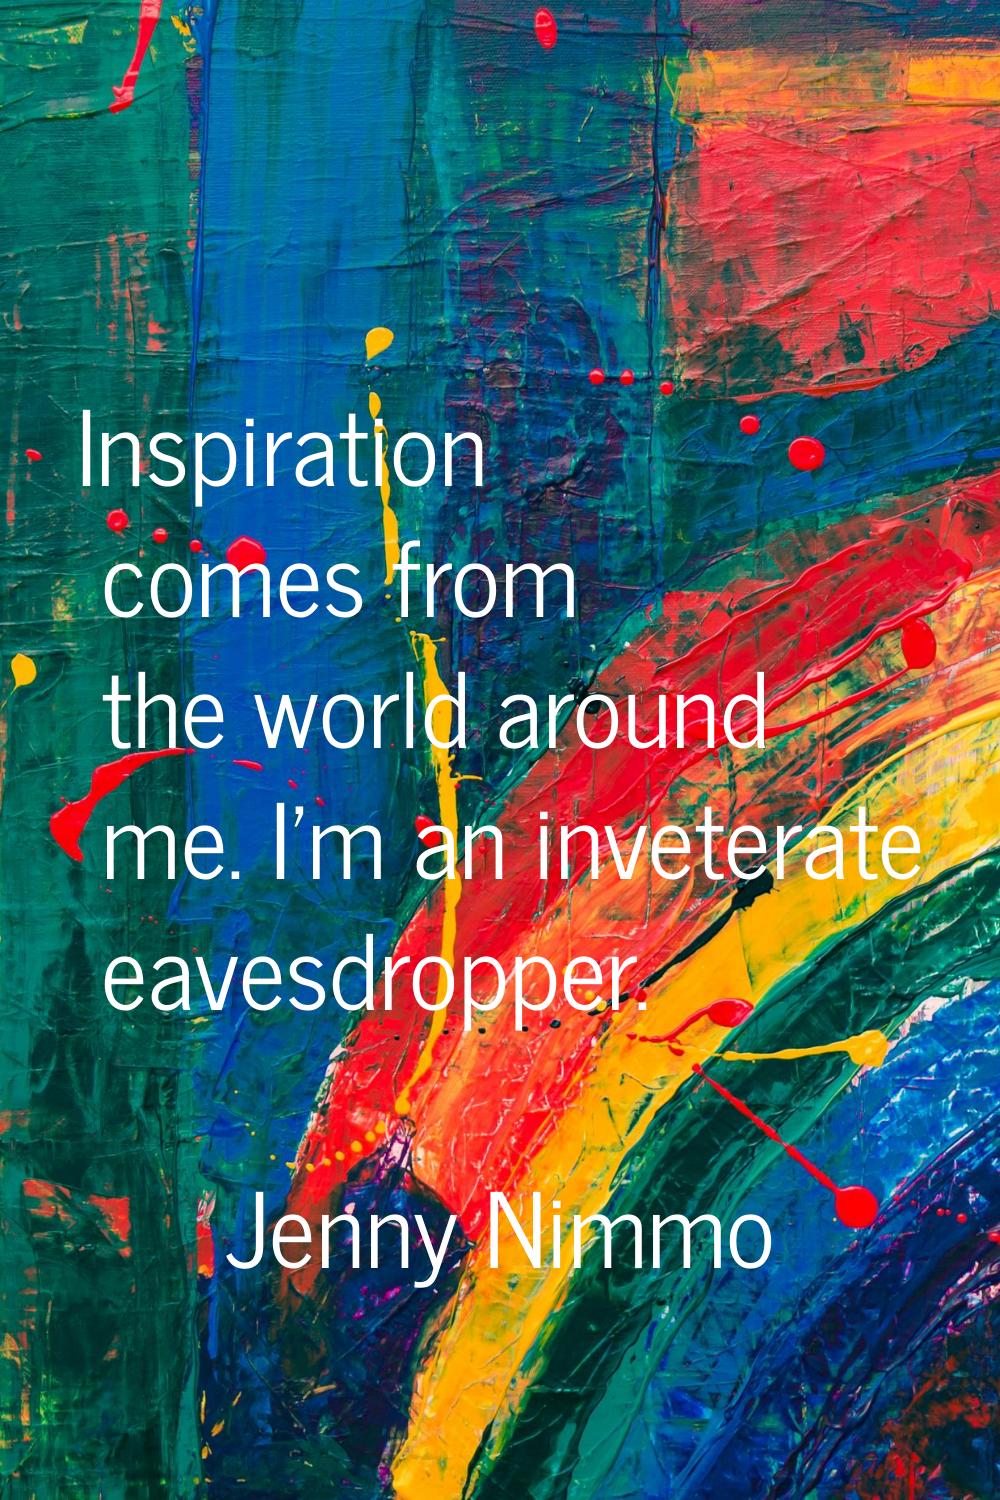 Inspiration comes from the world around me. I'm an inveterate eavesdropper.